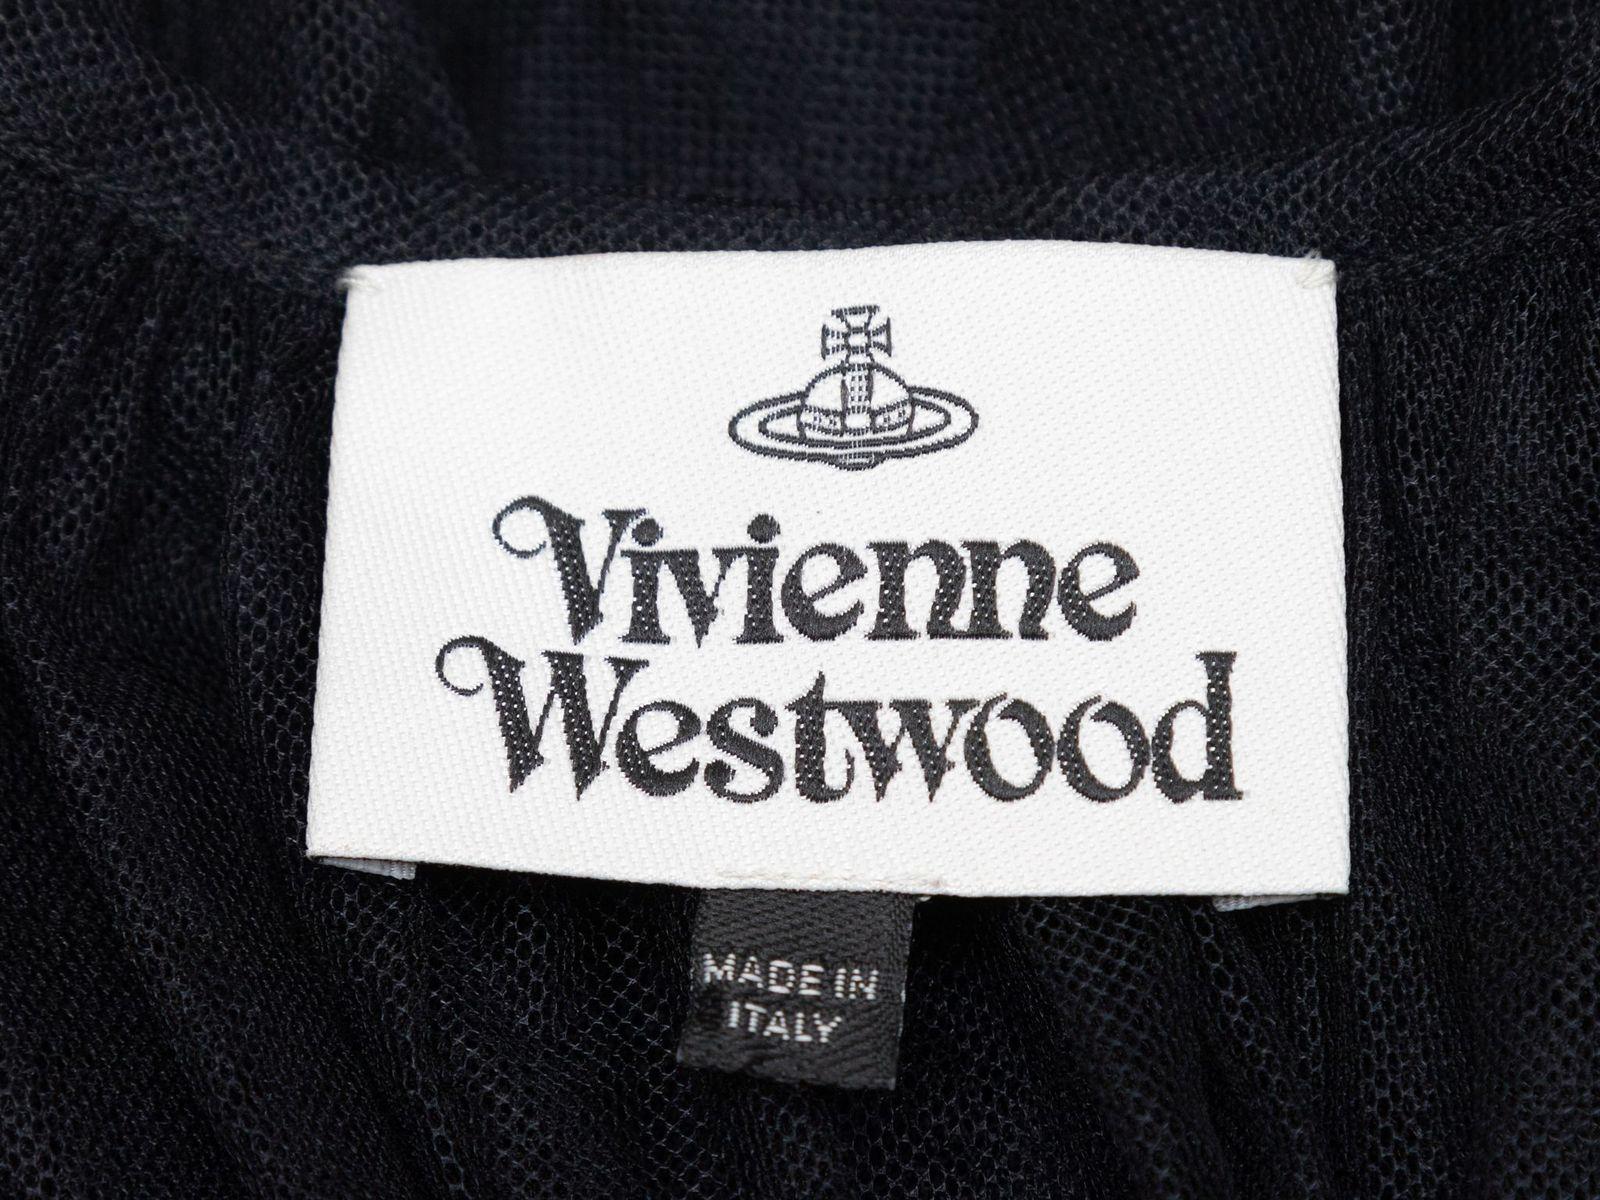 Product Details: Black sheer mesh peasant blouse by Vivienne Westwood. V-neck featuring tie accent. Long sleeves. Designer size 40. 42